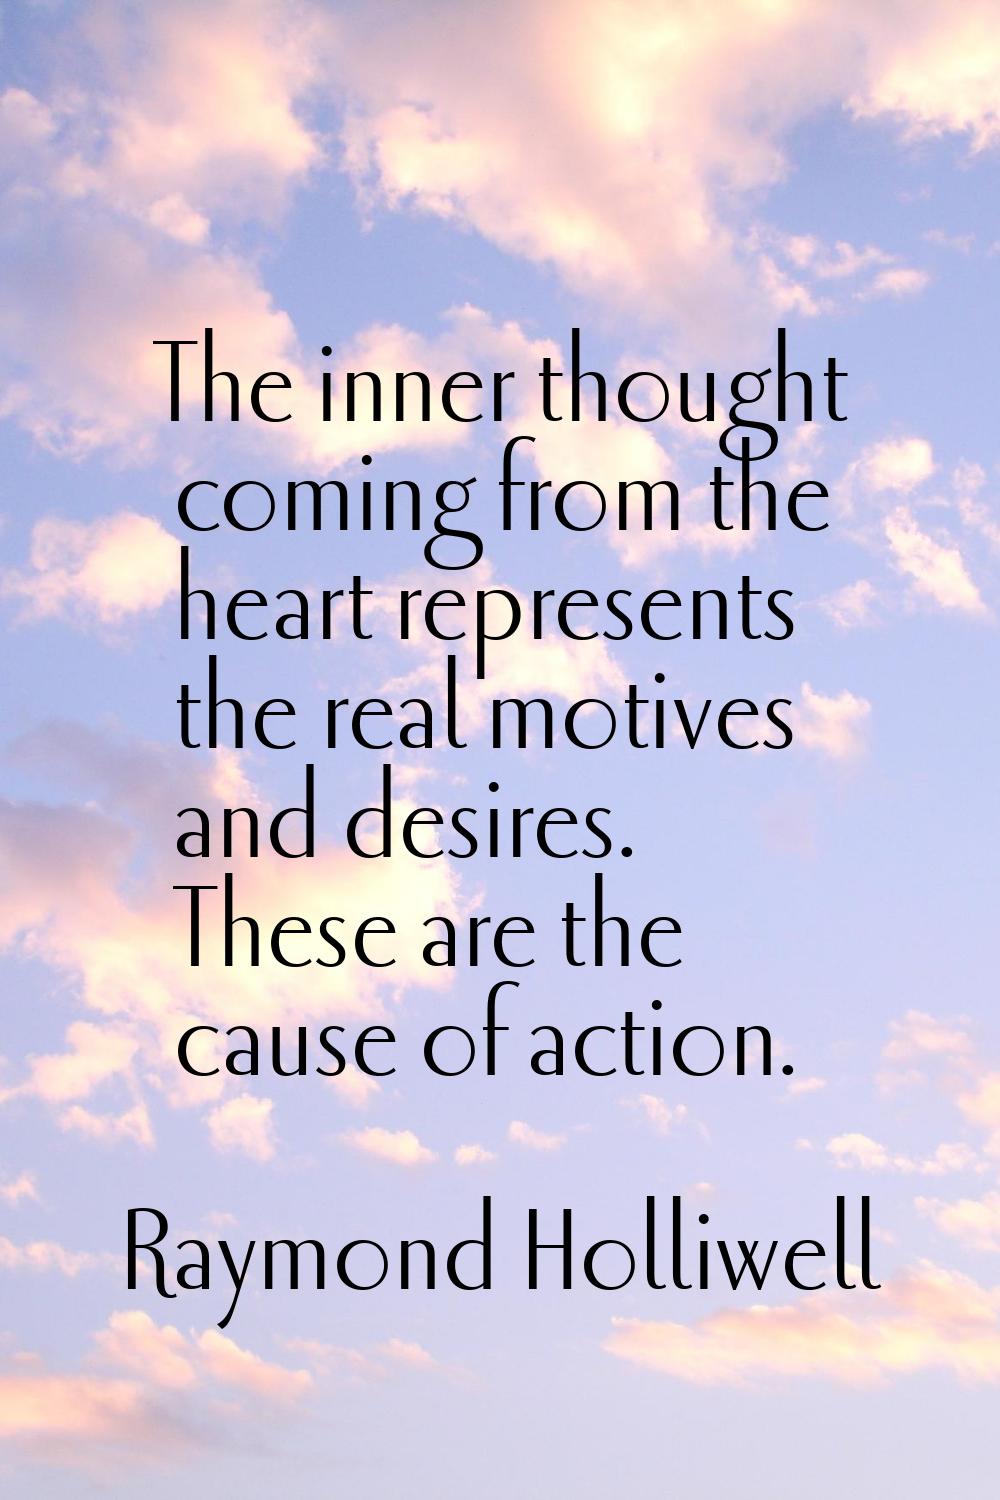 The inner thought coming from the heart represents the real motives and desires. These are the caus